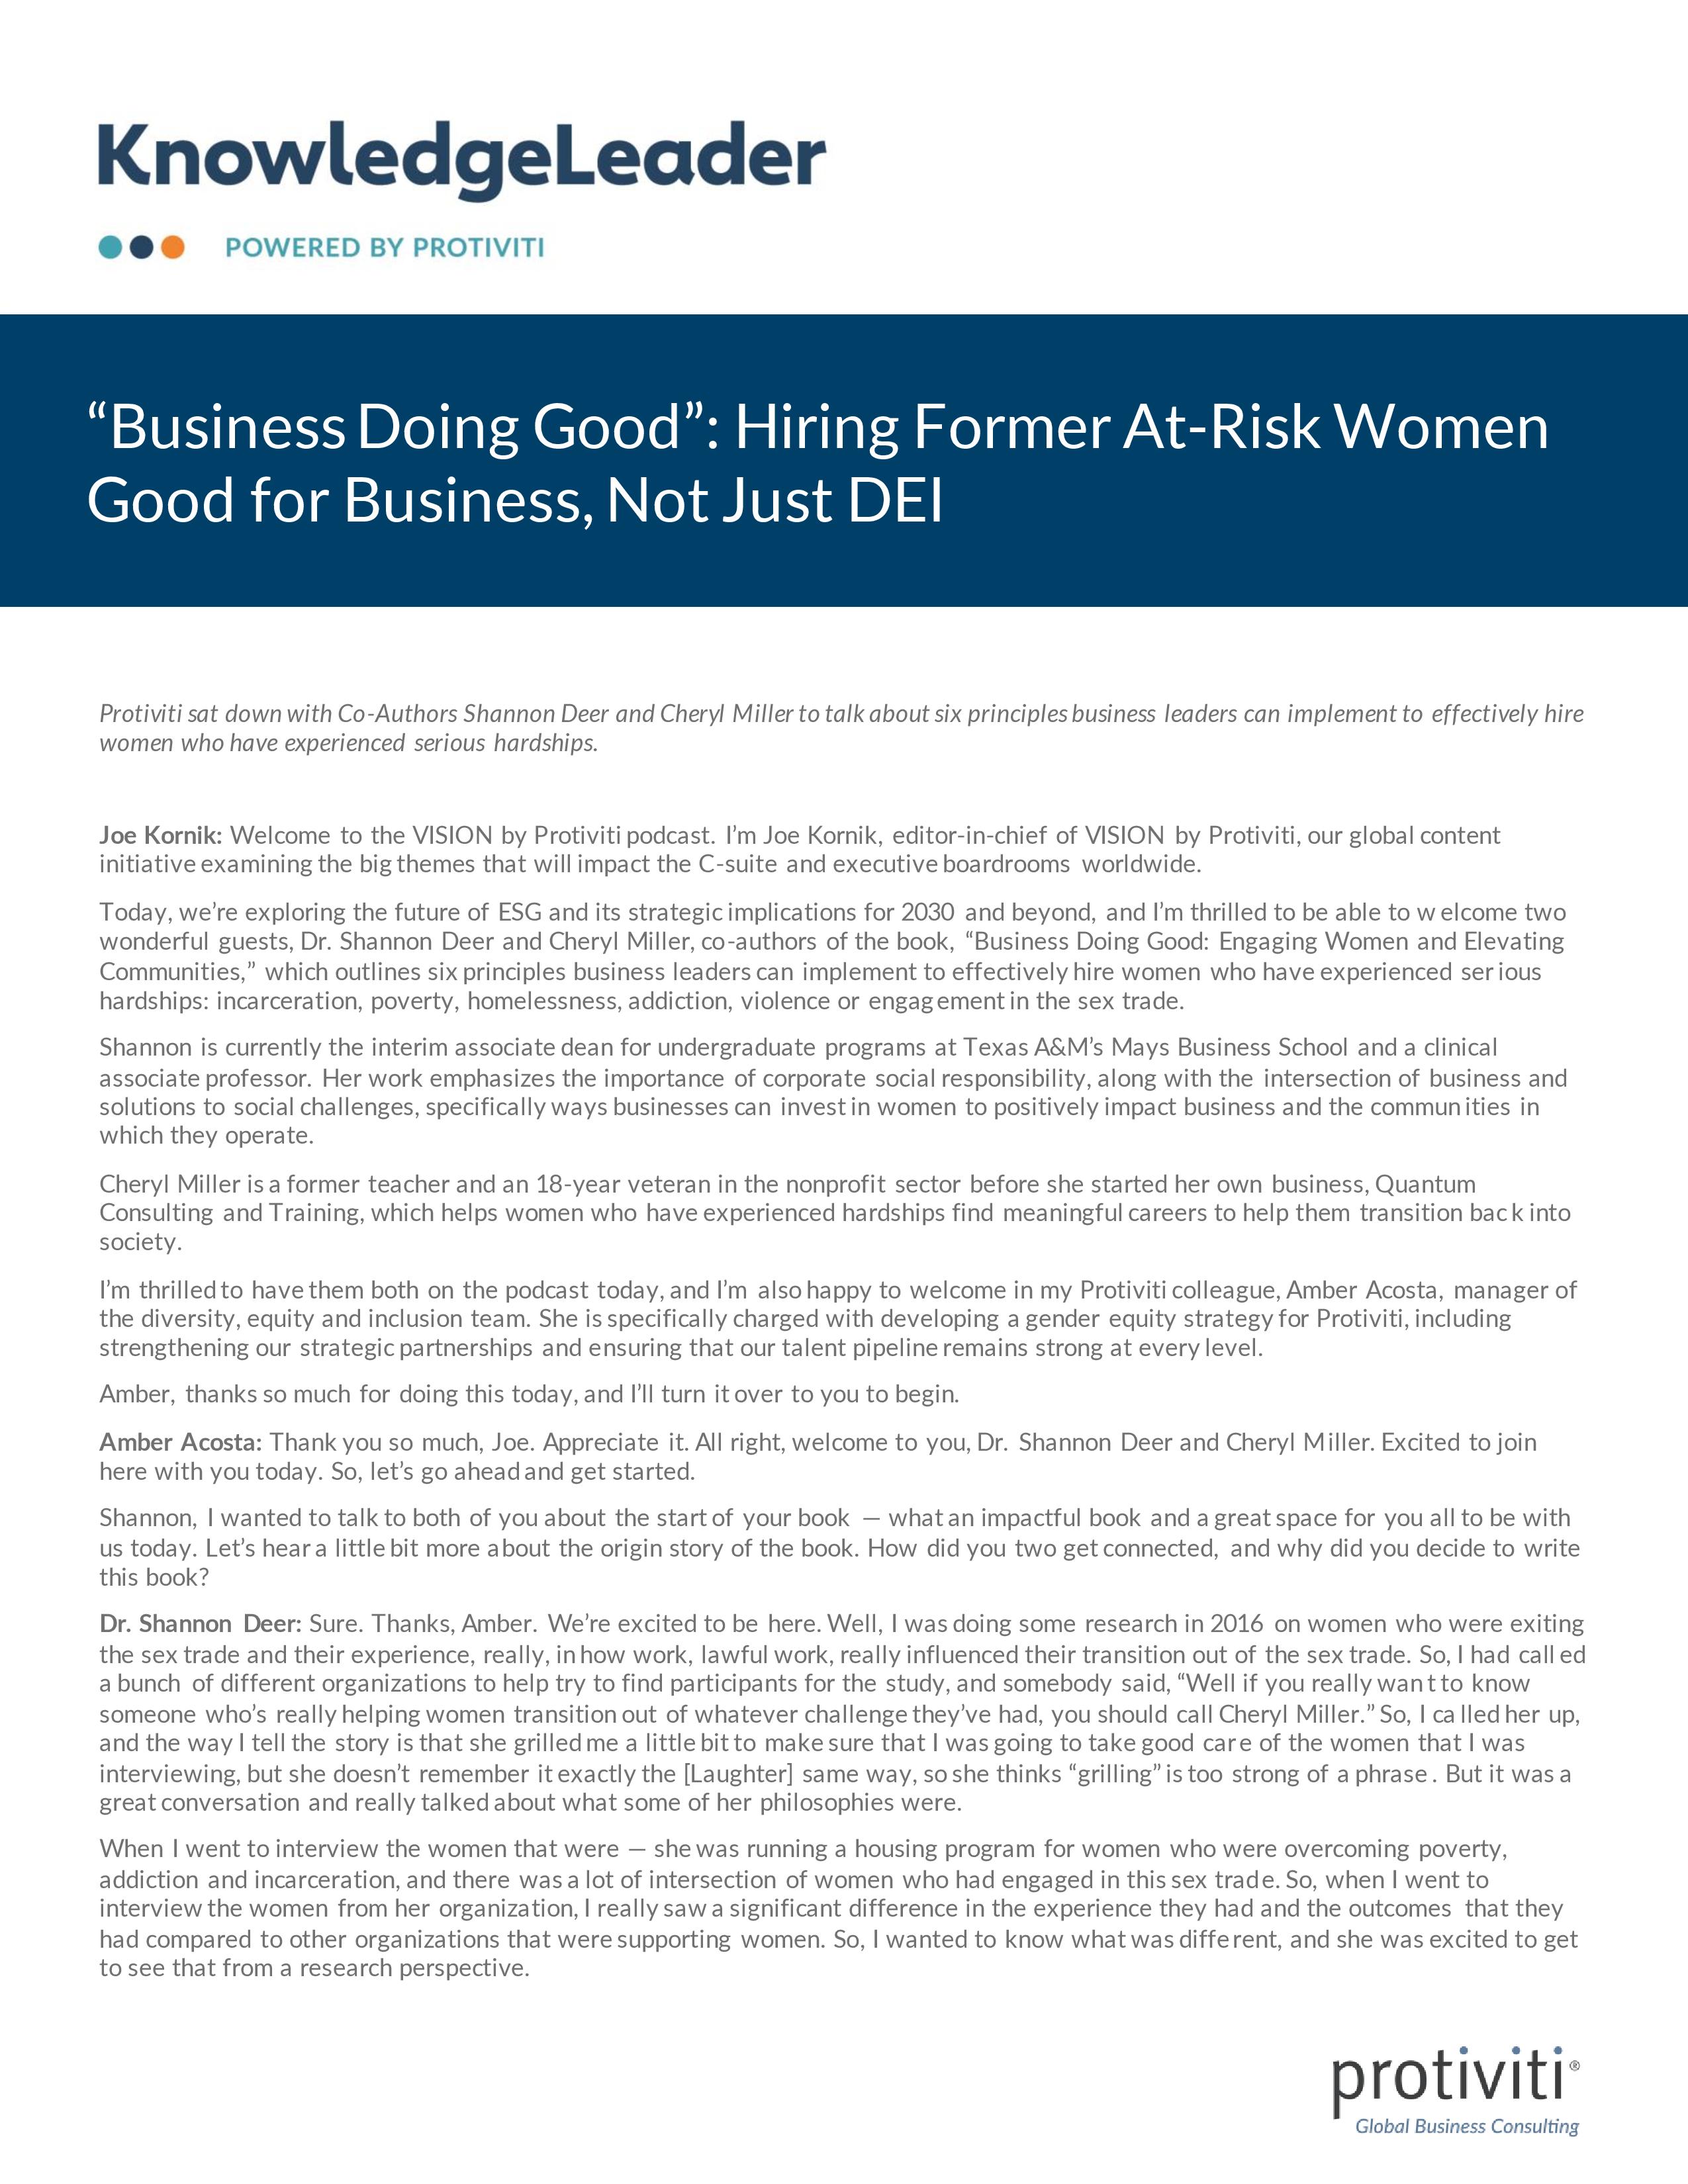 Screenshot of the first page of “Business Doing Good” Hiring Former At-Risk Women Good for Business, Not Just DEI